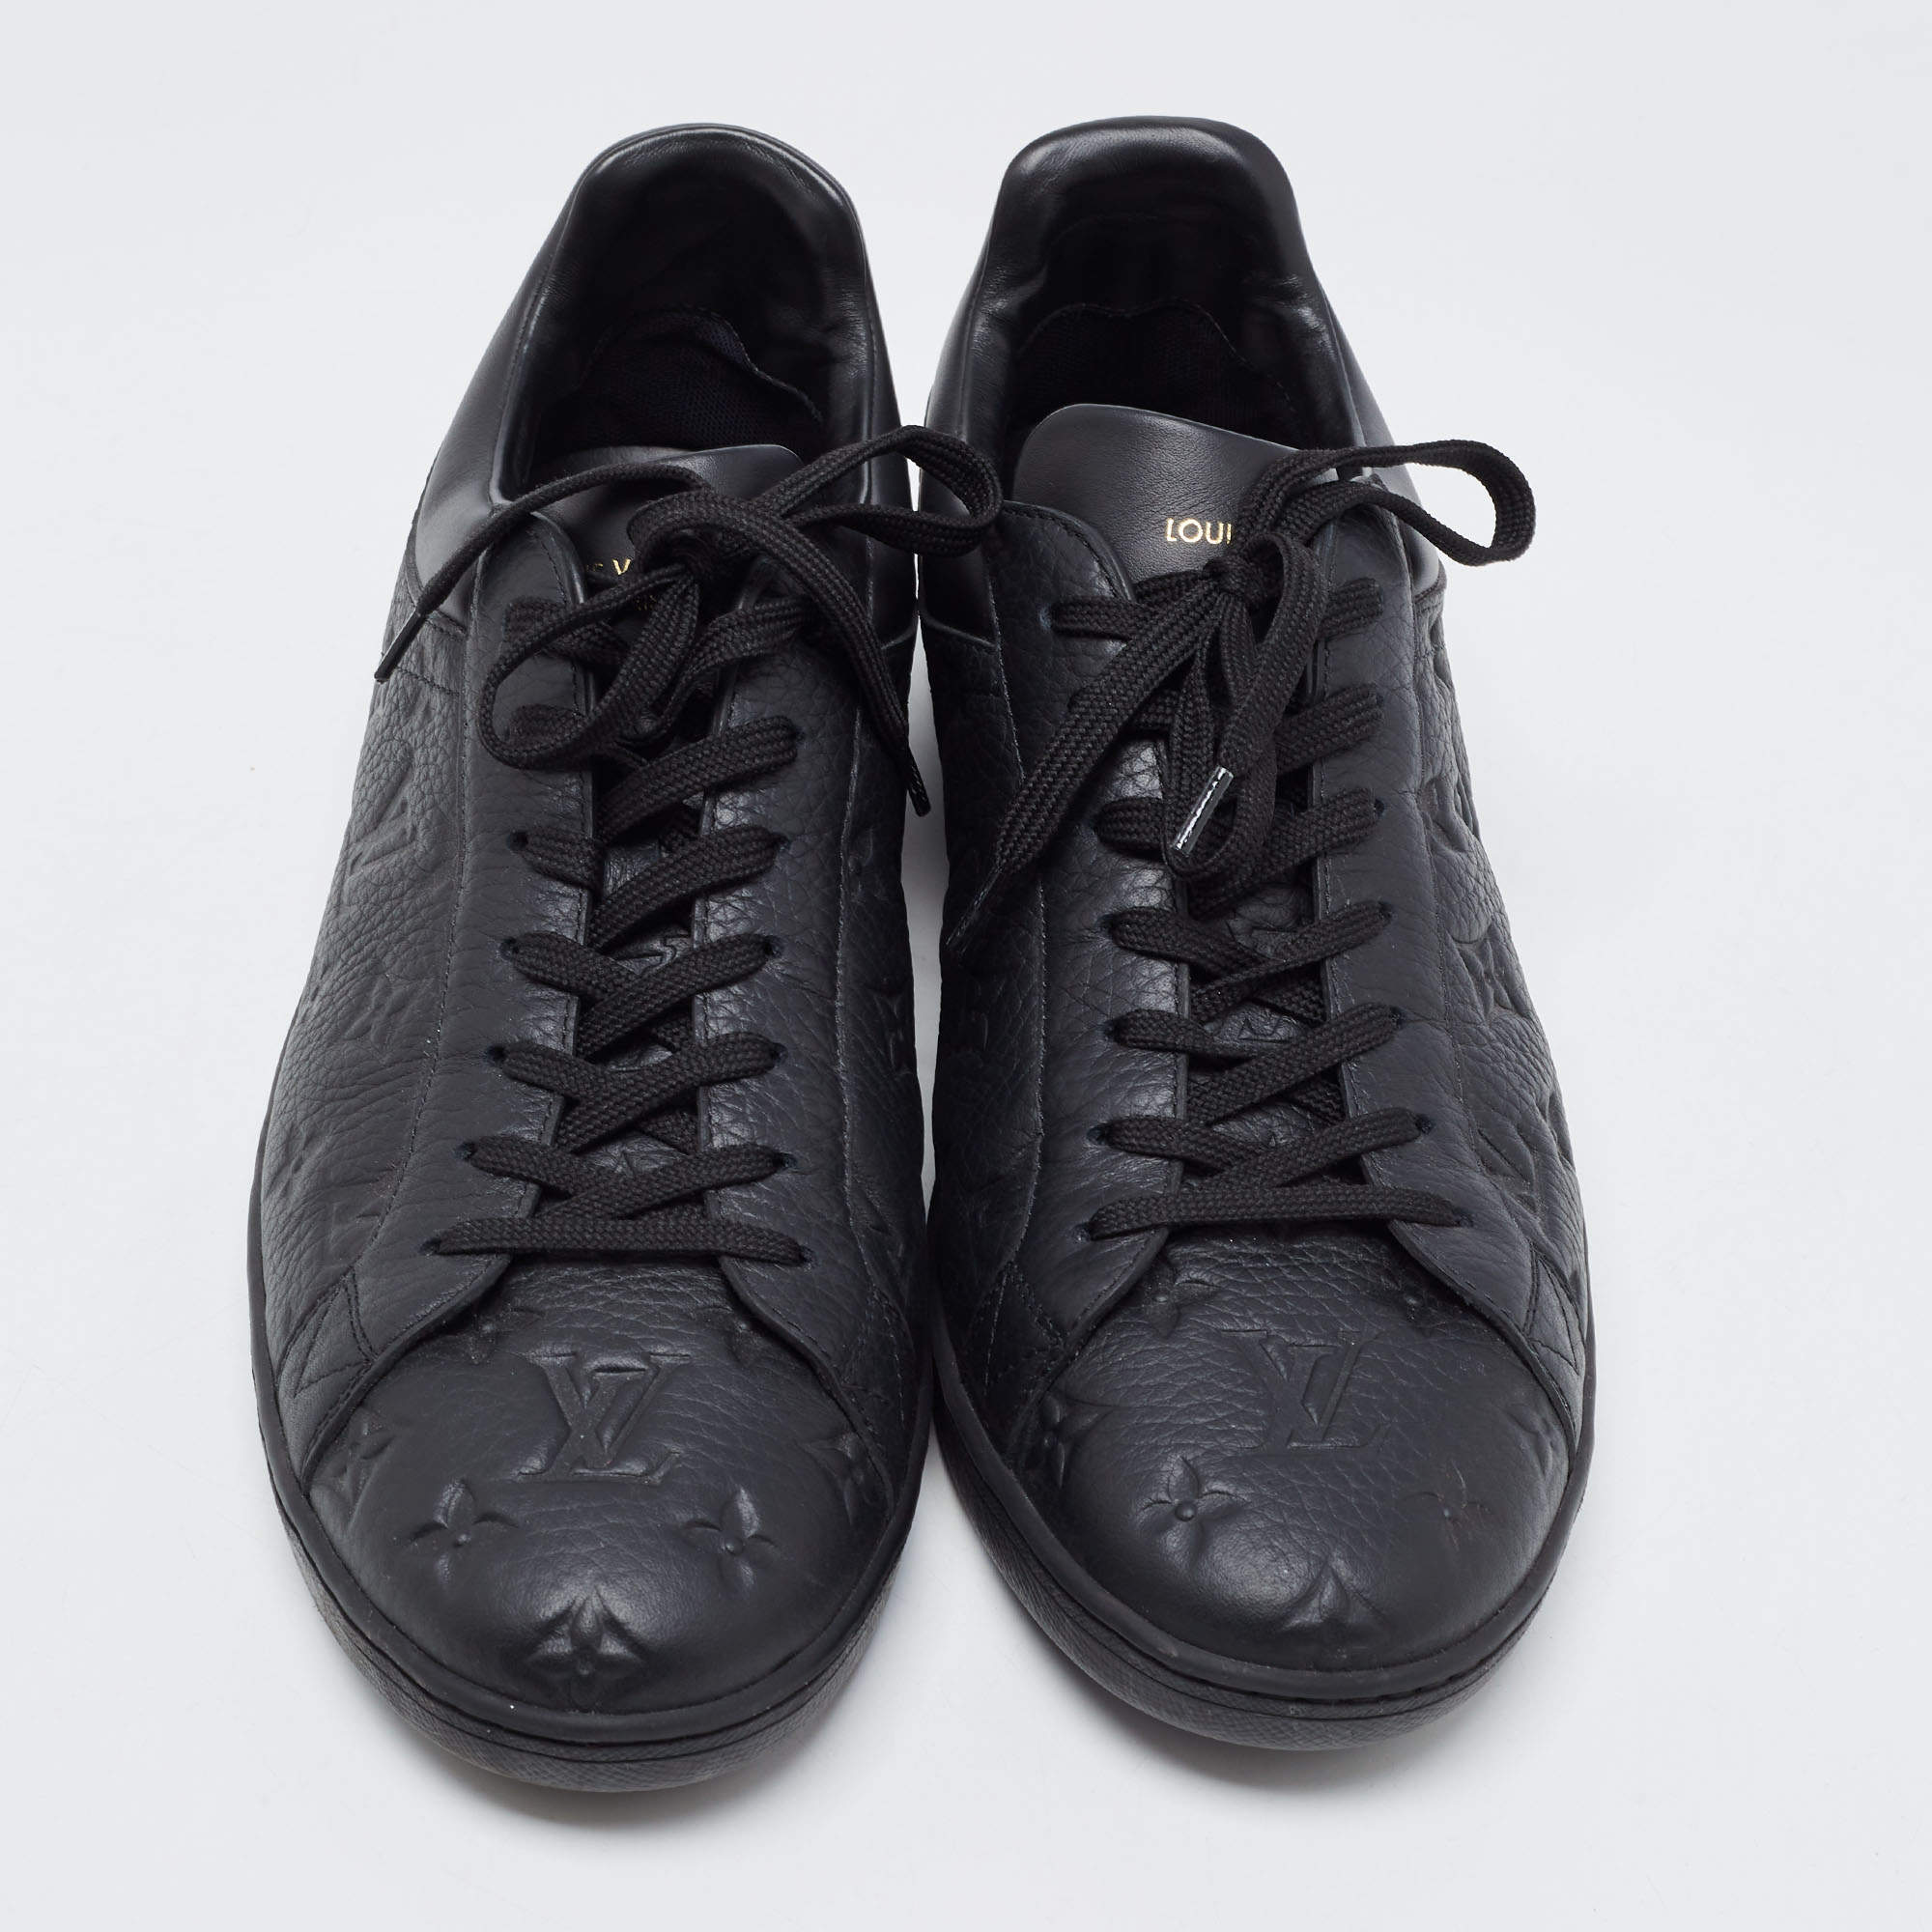 Luxembourg low trainers Louis Vuitton Black size 43 EU in Other - 36241919